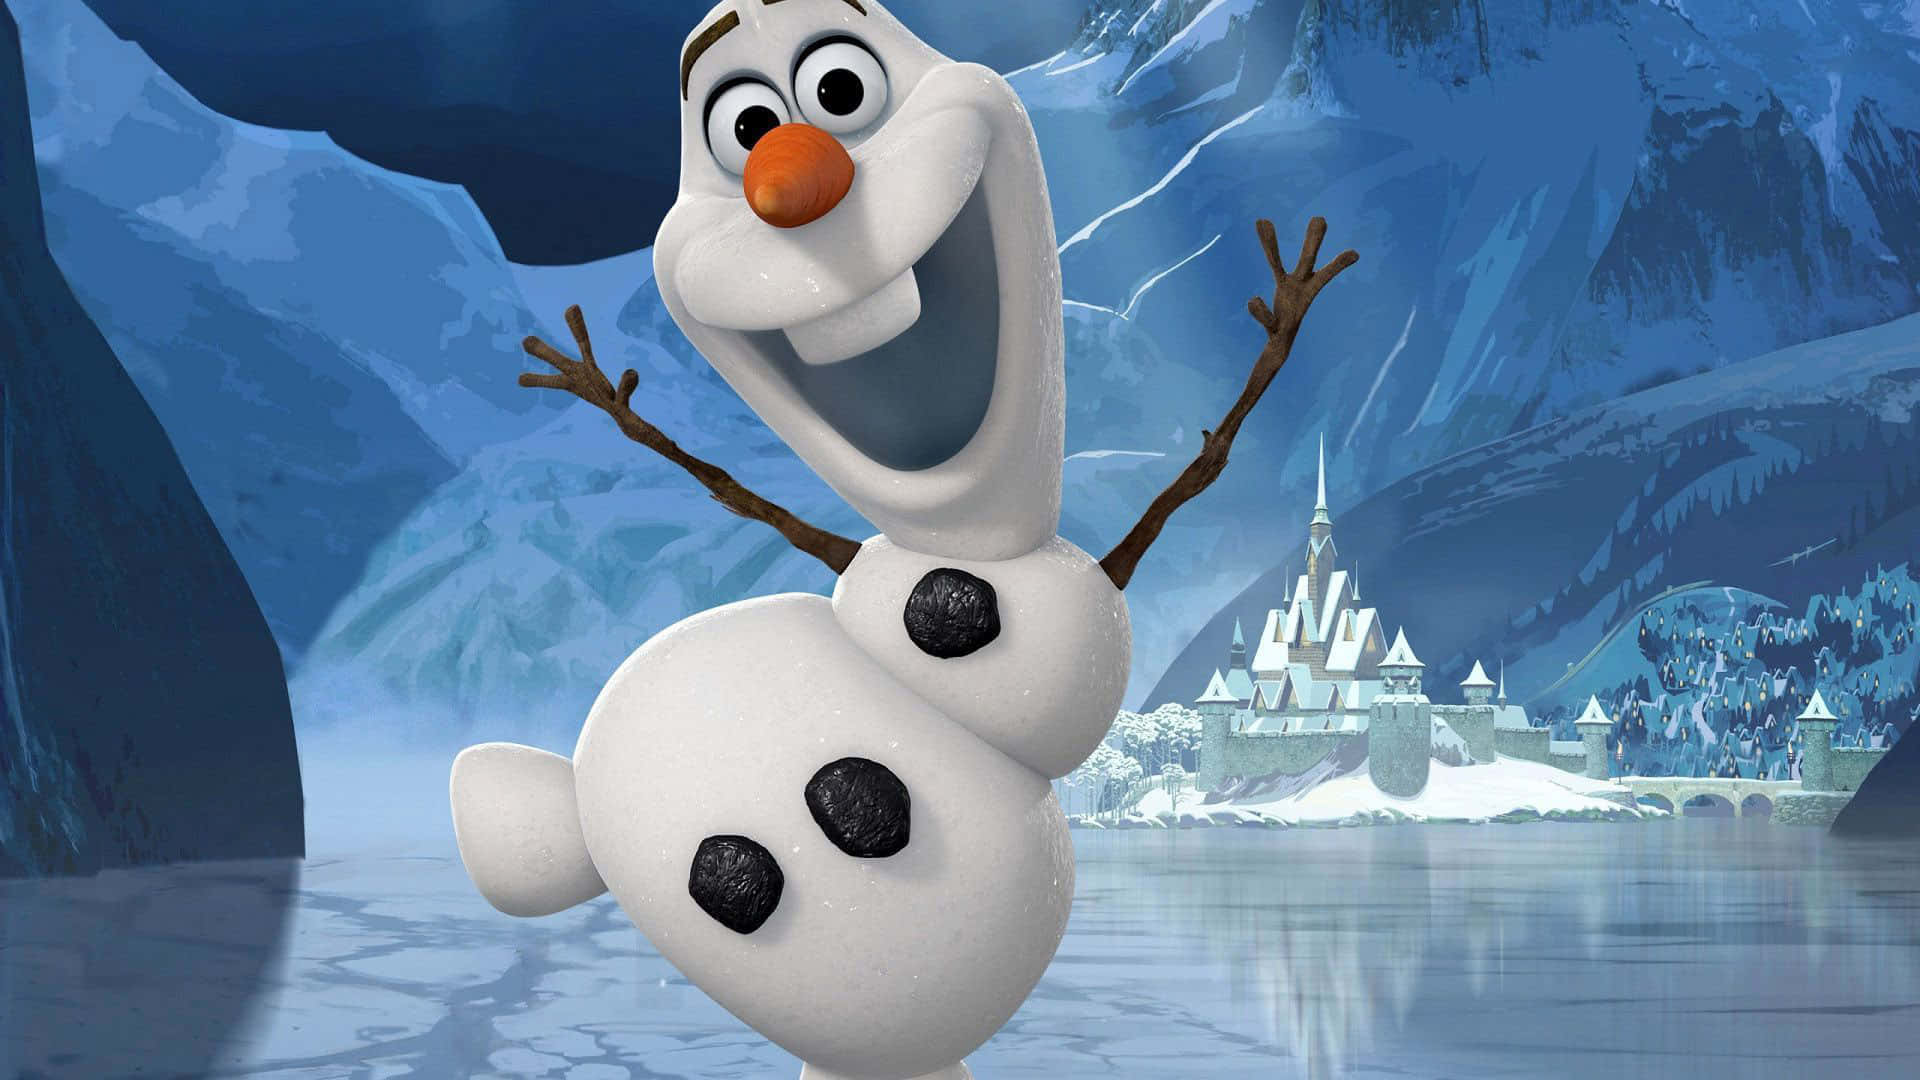 "Experience the true spirit of winter with Cute Olaf" Wallpaper